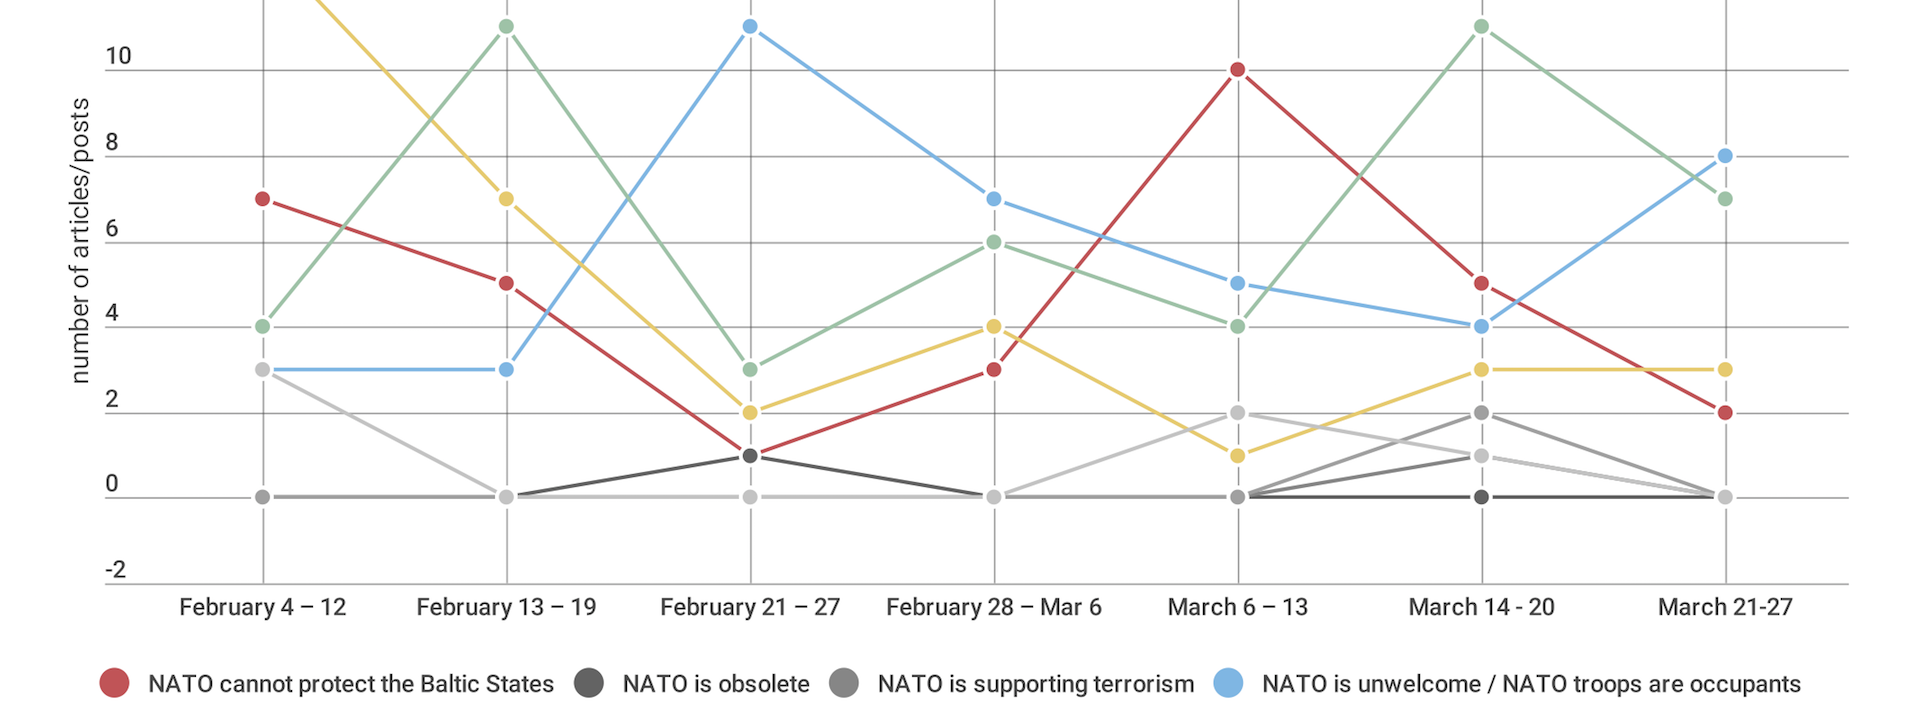 Russian Narratives on NATO’s Deployment